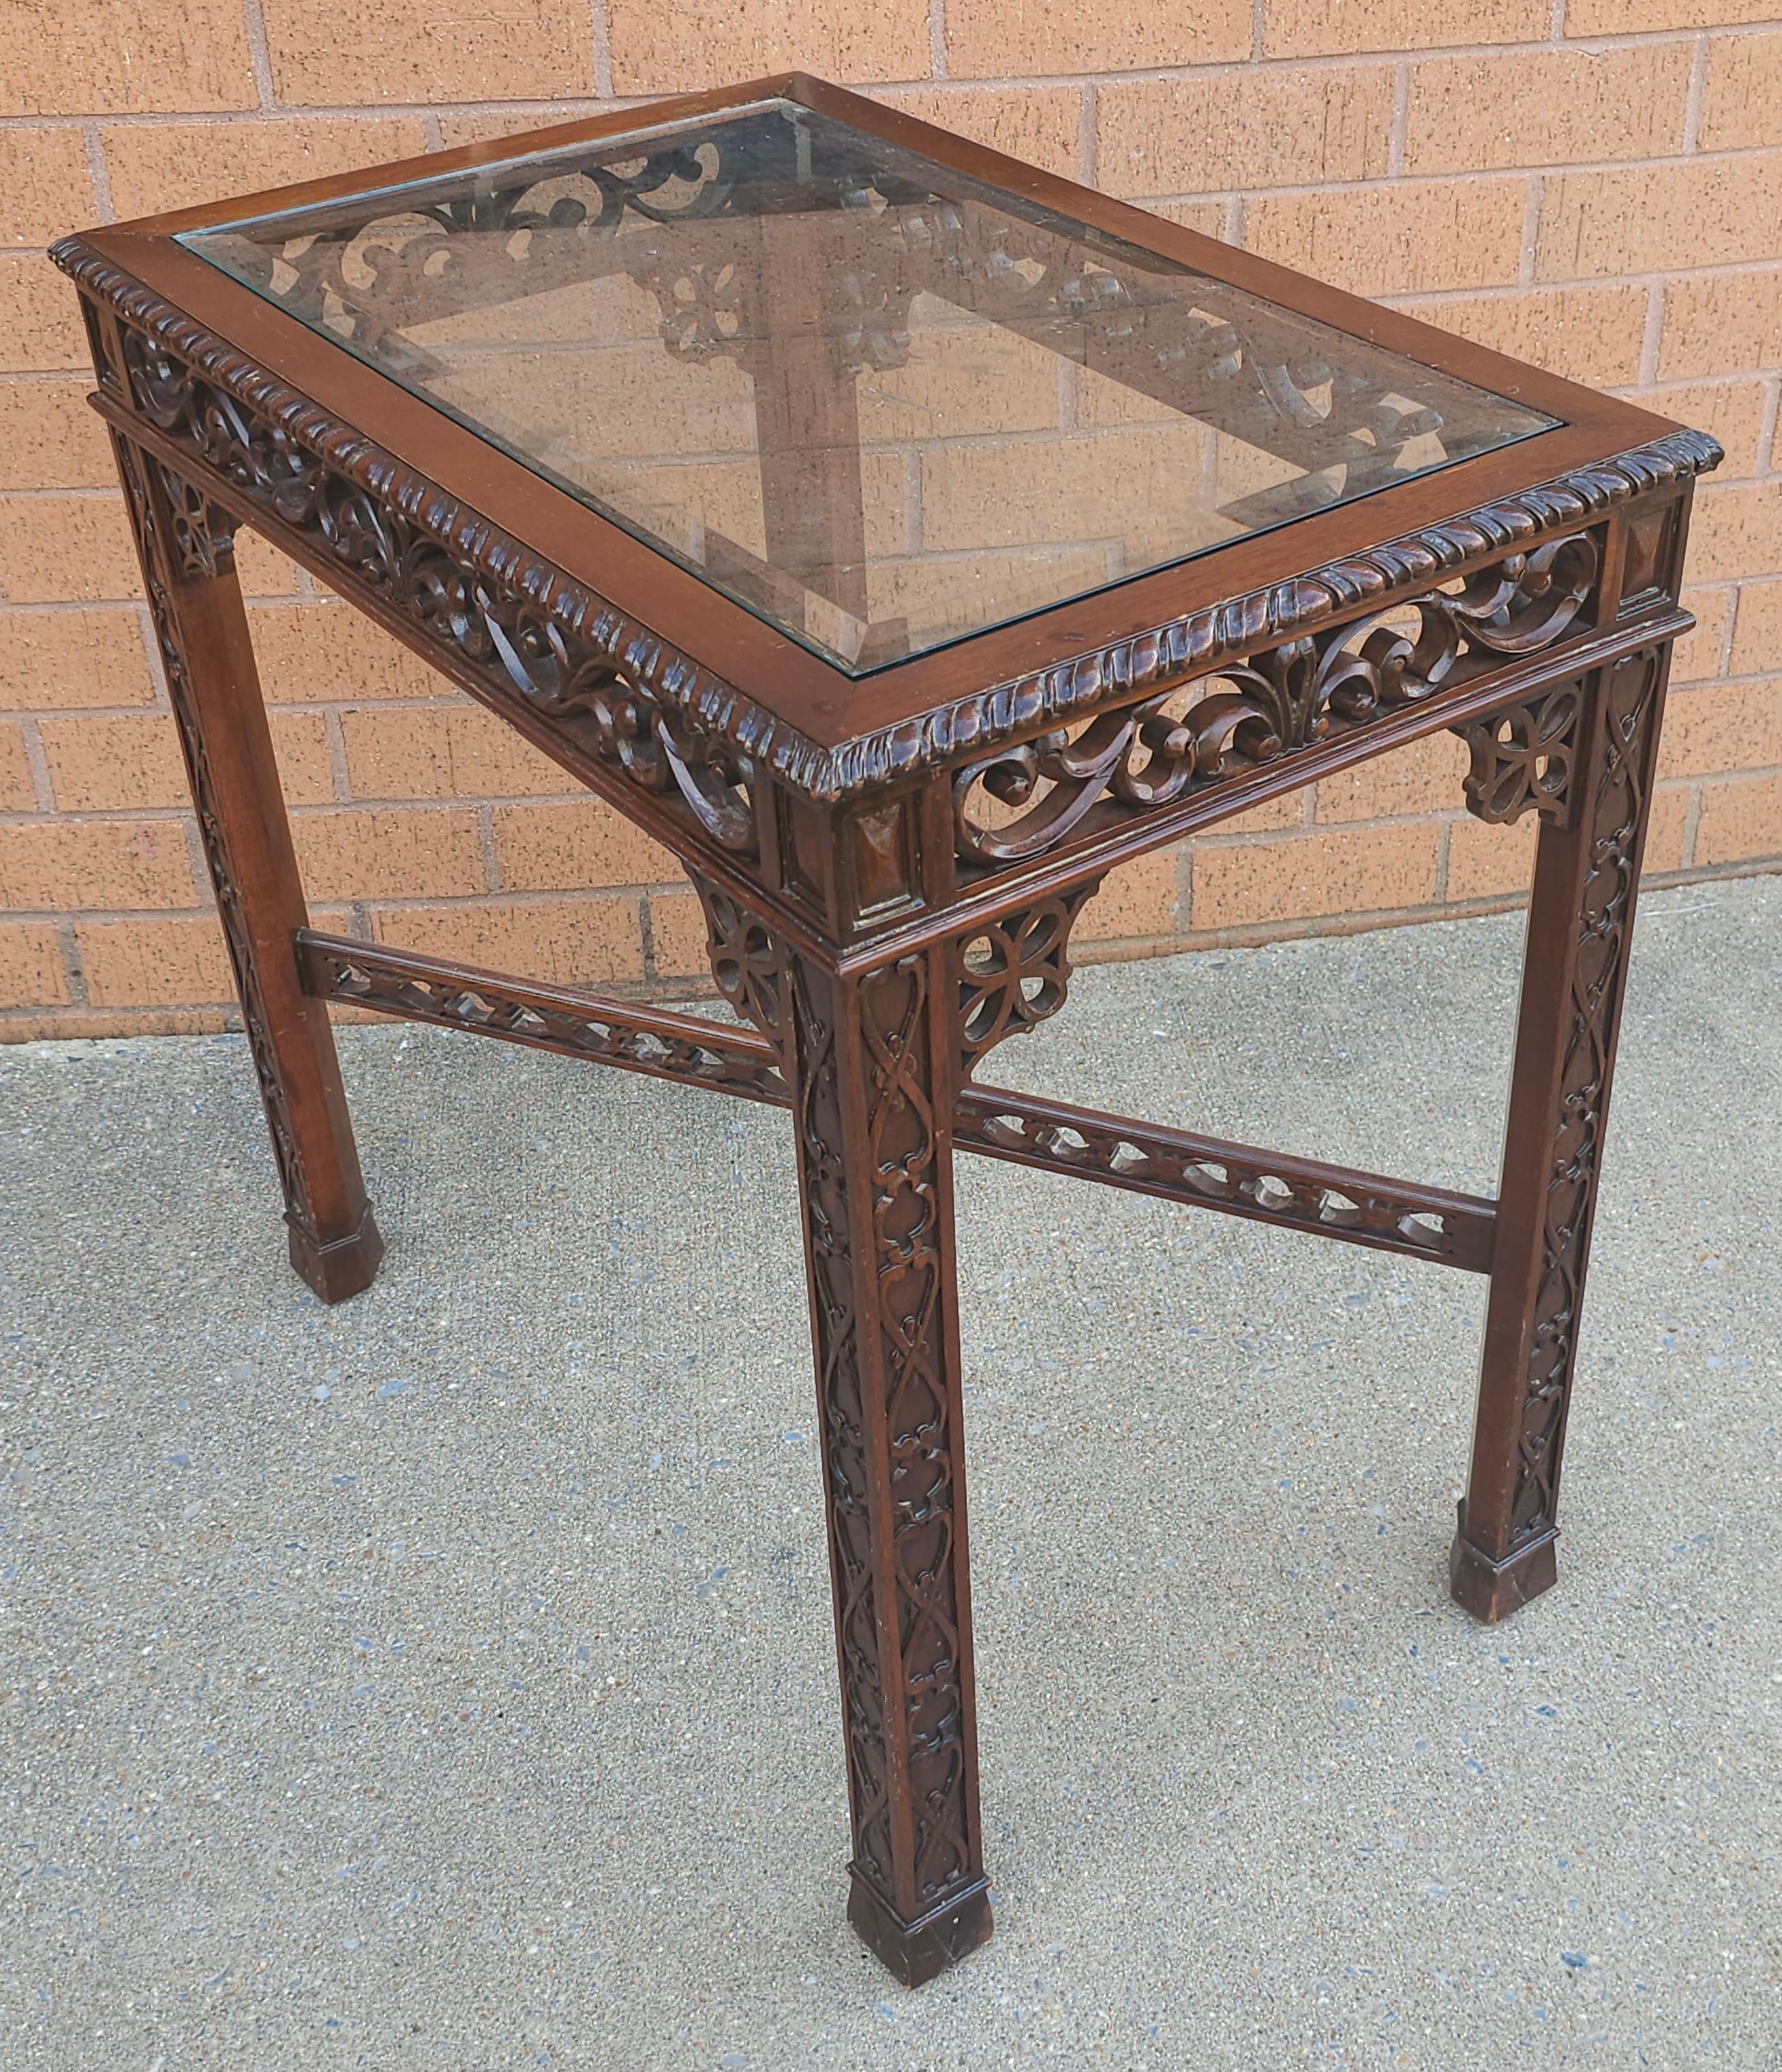 20th Century Pair Of Chinese Chippendale Style Fretwork and Glass Inset Mahogany Side Tables For Sale